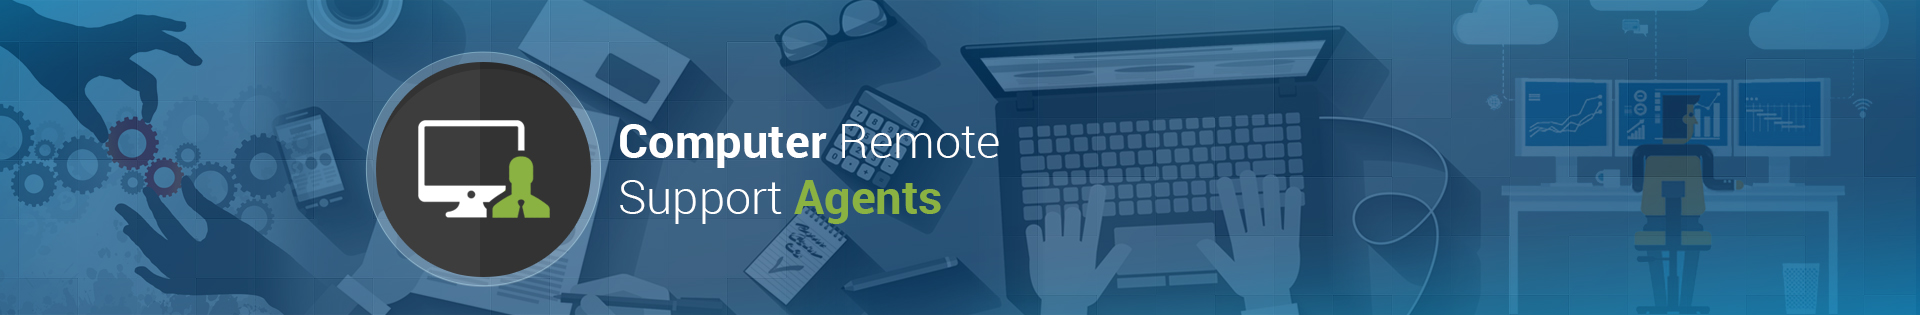 Computer Remote Support Agents